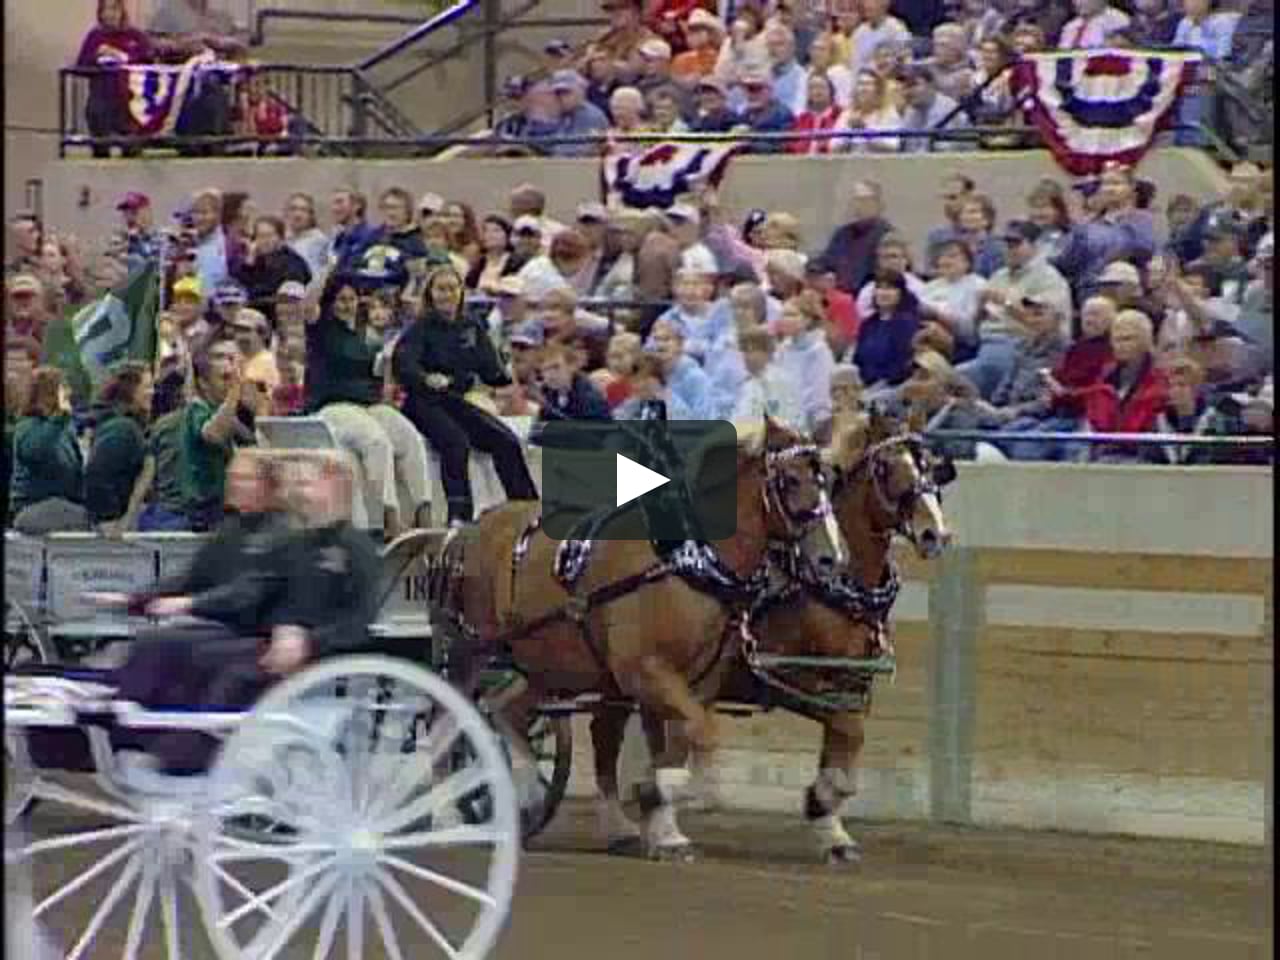 Michigan Great Lakes International Draft Horse Show and Pull Sponsor